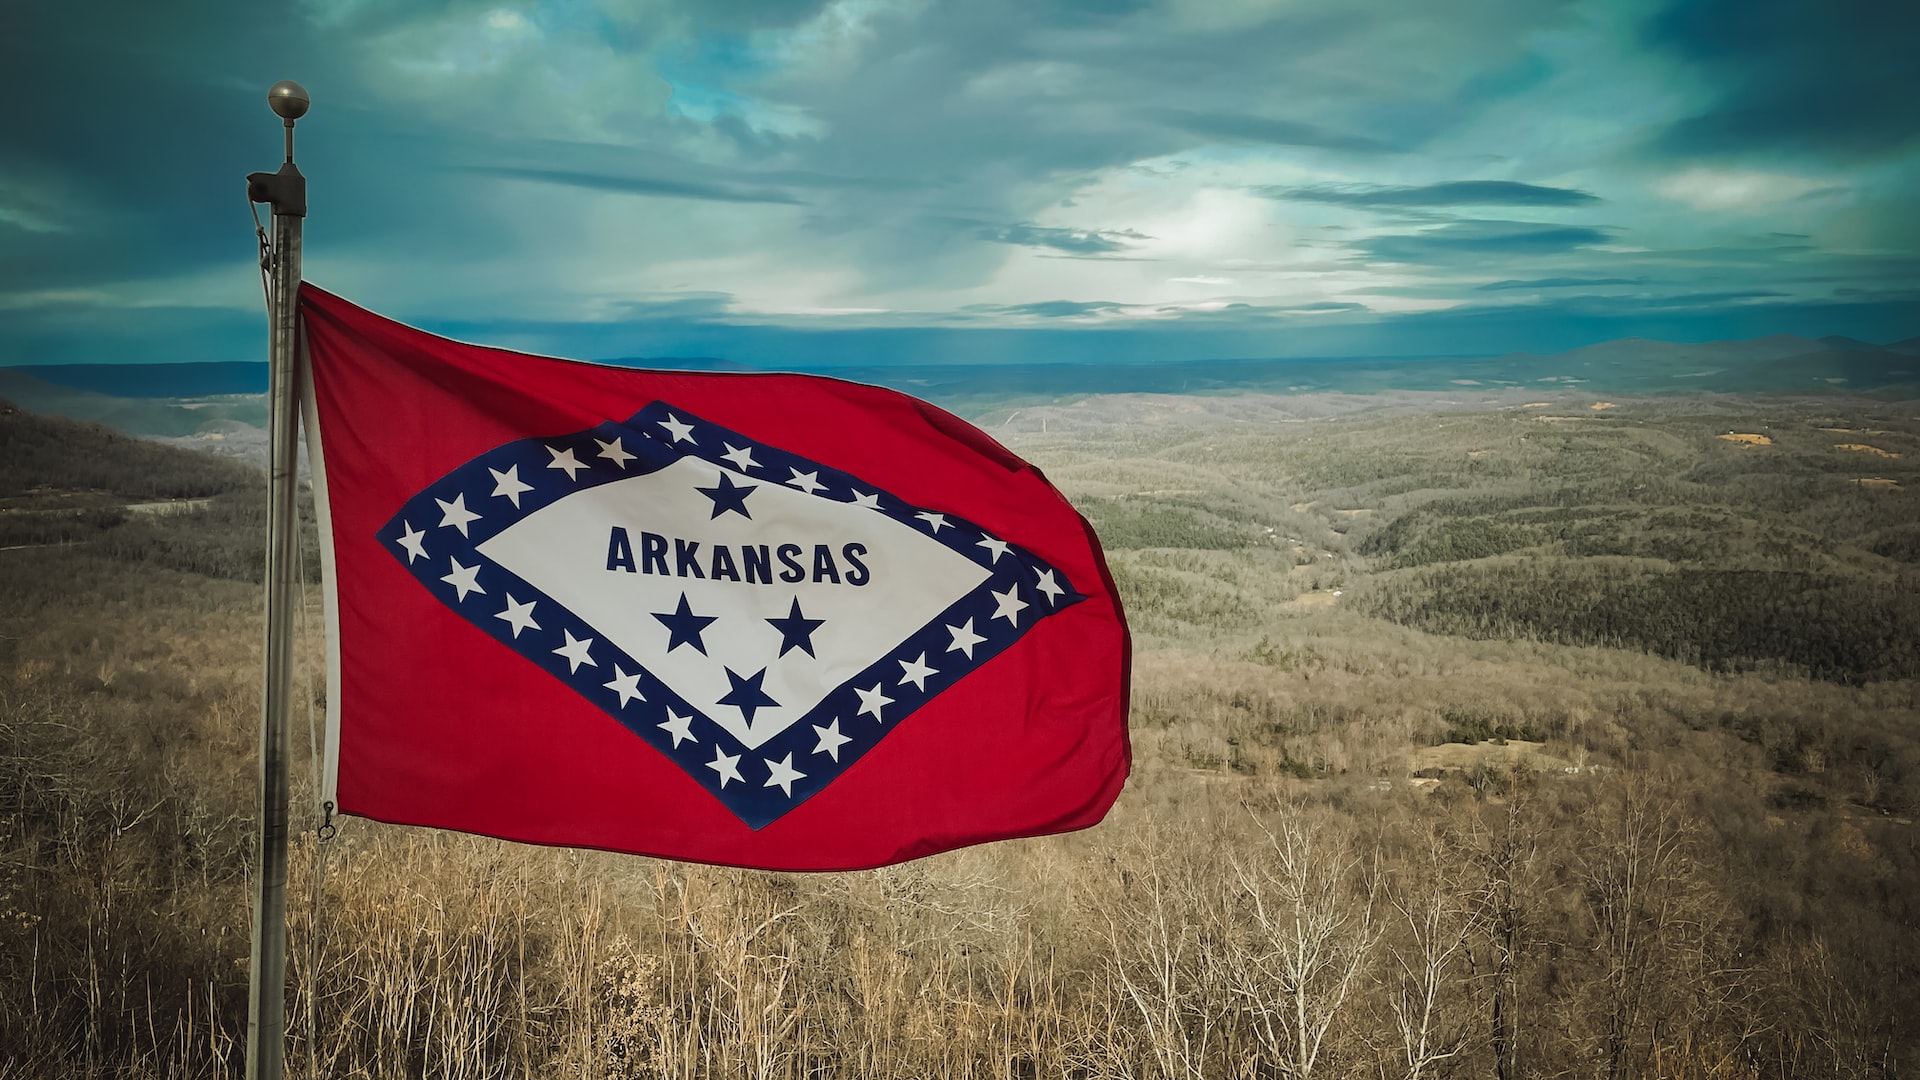 All About Arkansas - Adventures of Mo